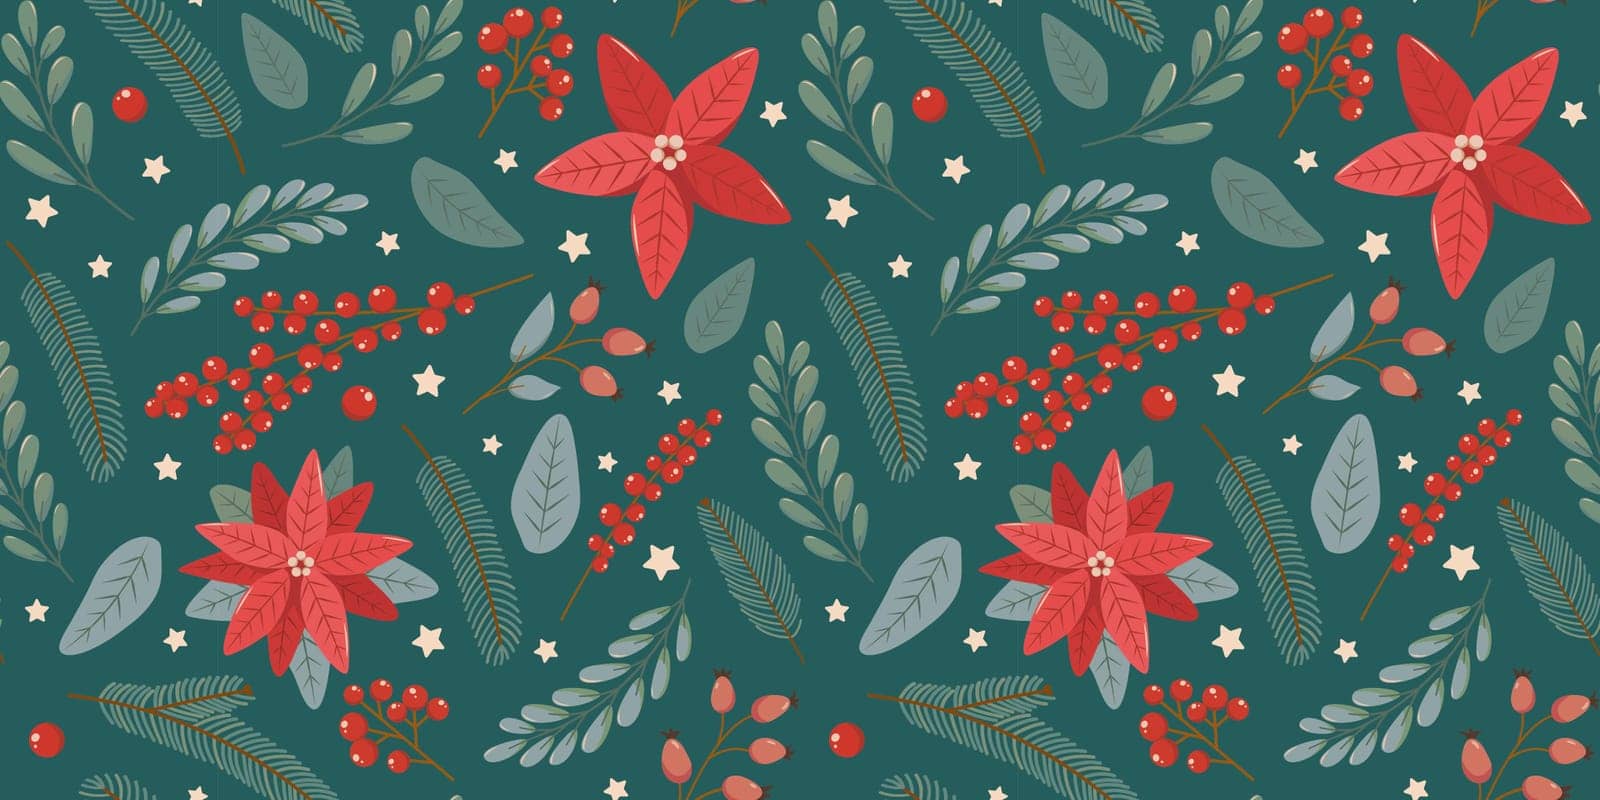 Winter rectangular seamless pattern on green background with hand drawn christmas tree branches, poinsettia, berries and leaves in flat vector style. Holiday seasonal floral decoration.